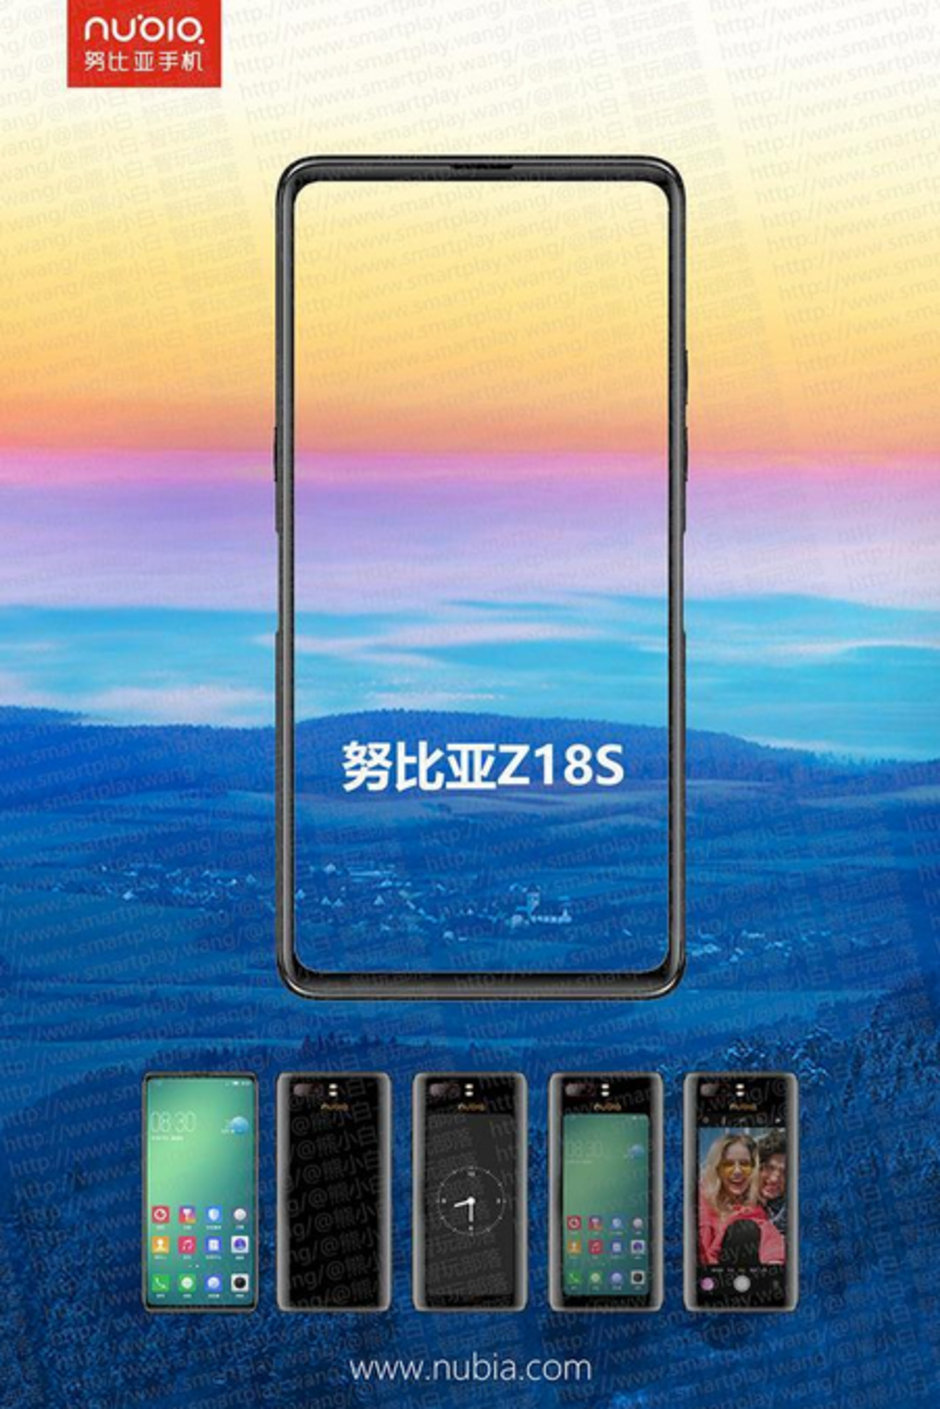 Teaser for the Nubia Z18S - Nubia's dual-screened Z18S to carry a 5.1-inch OLED panel in back?